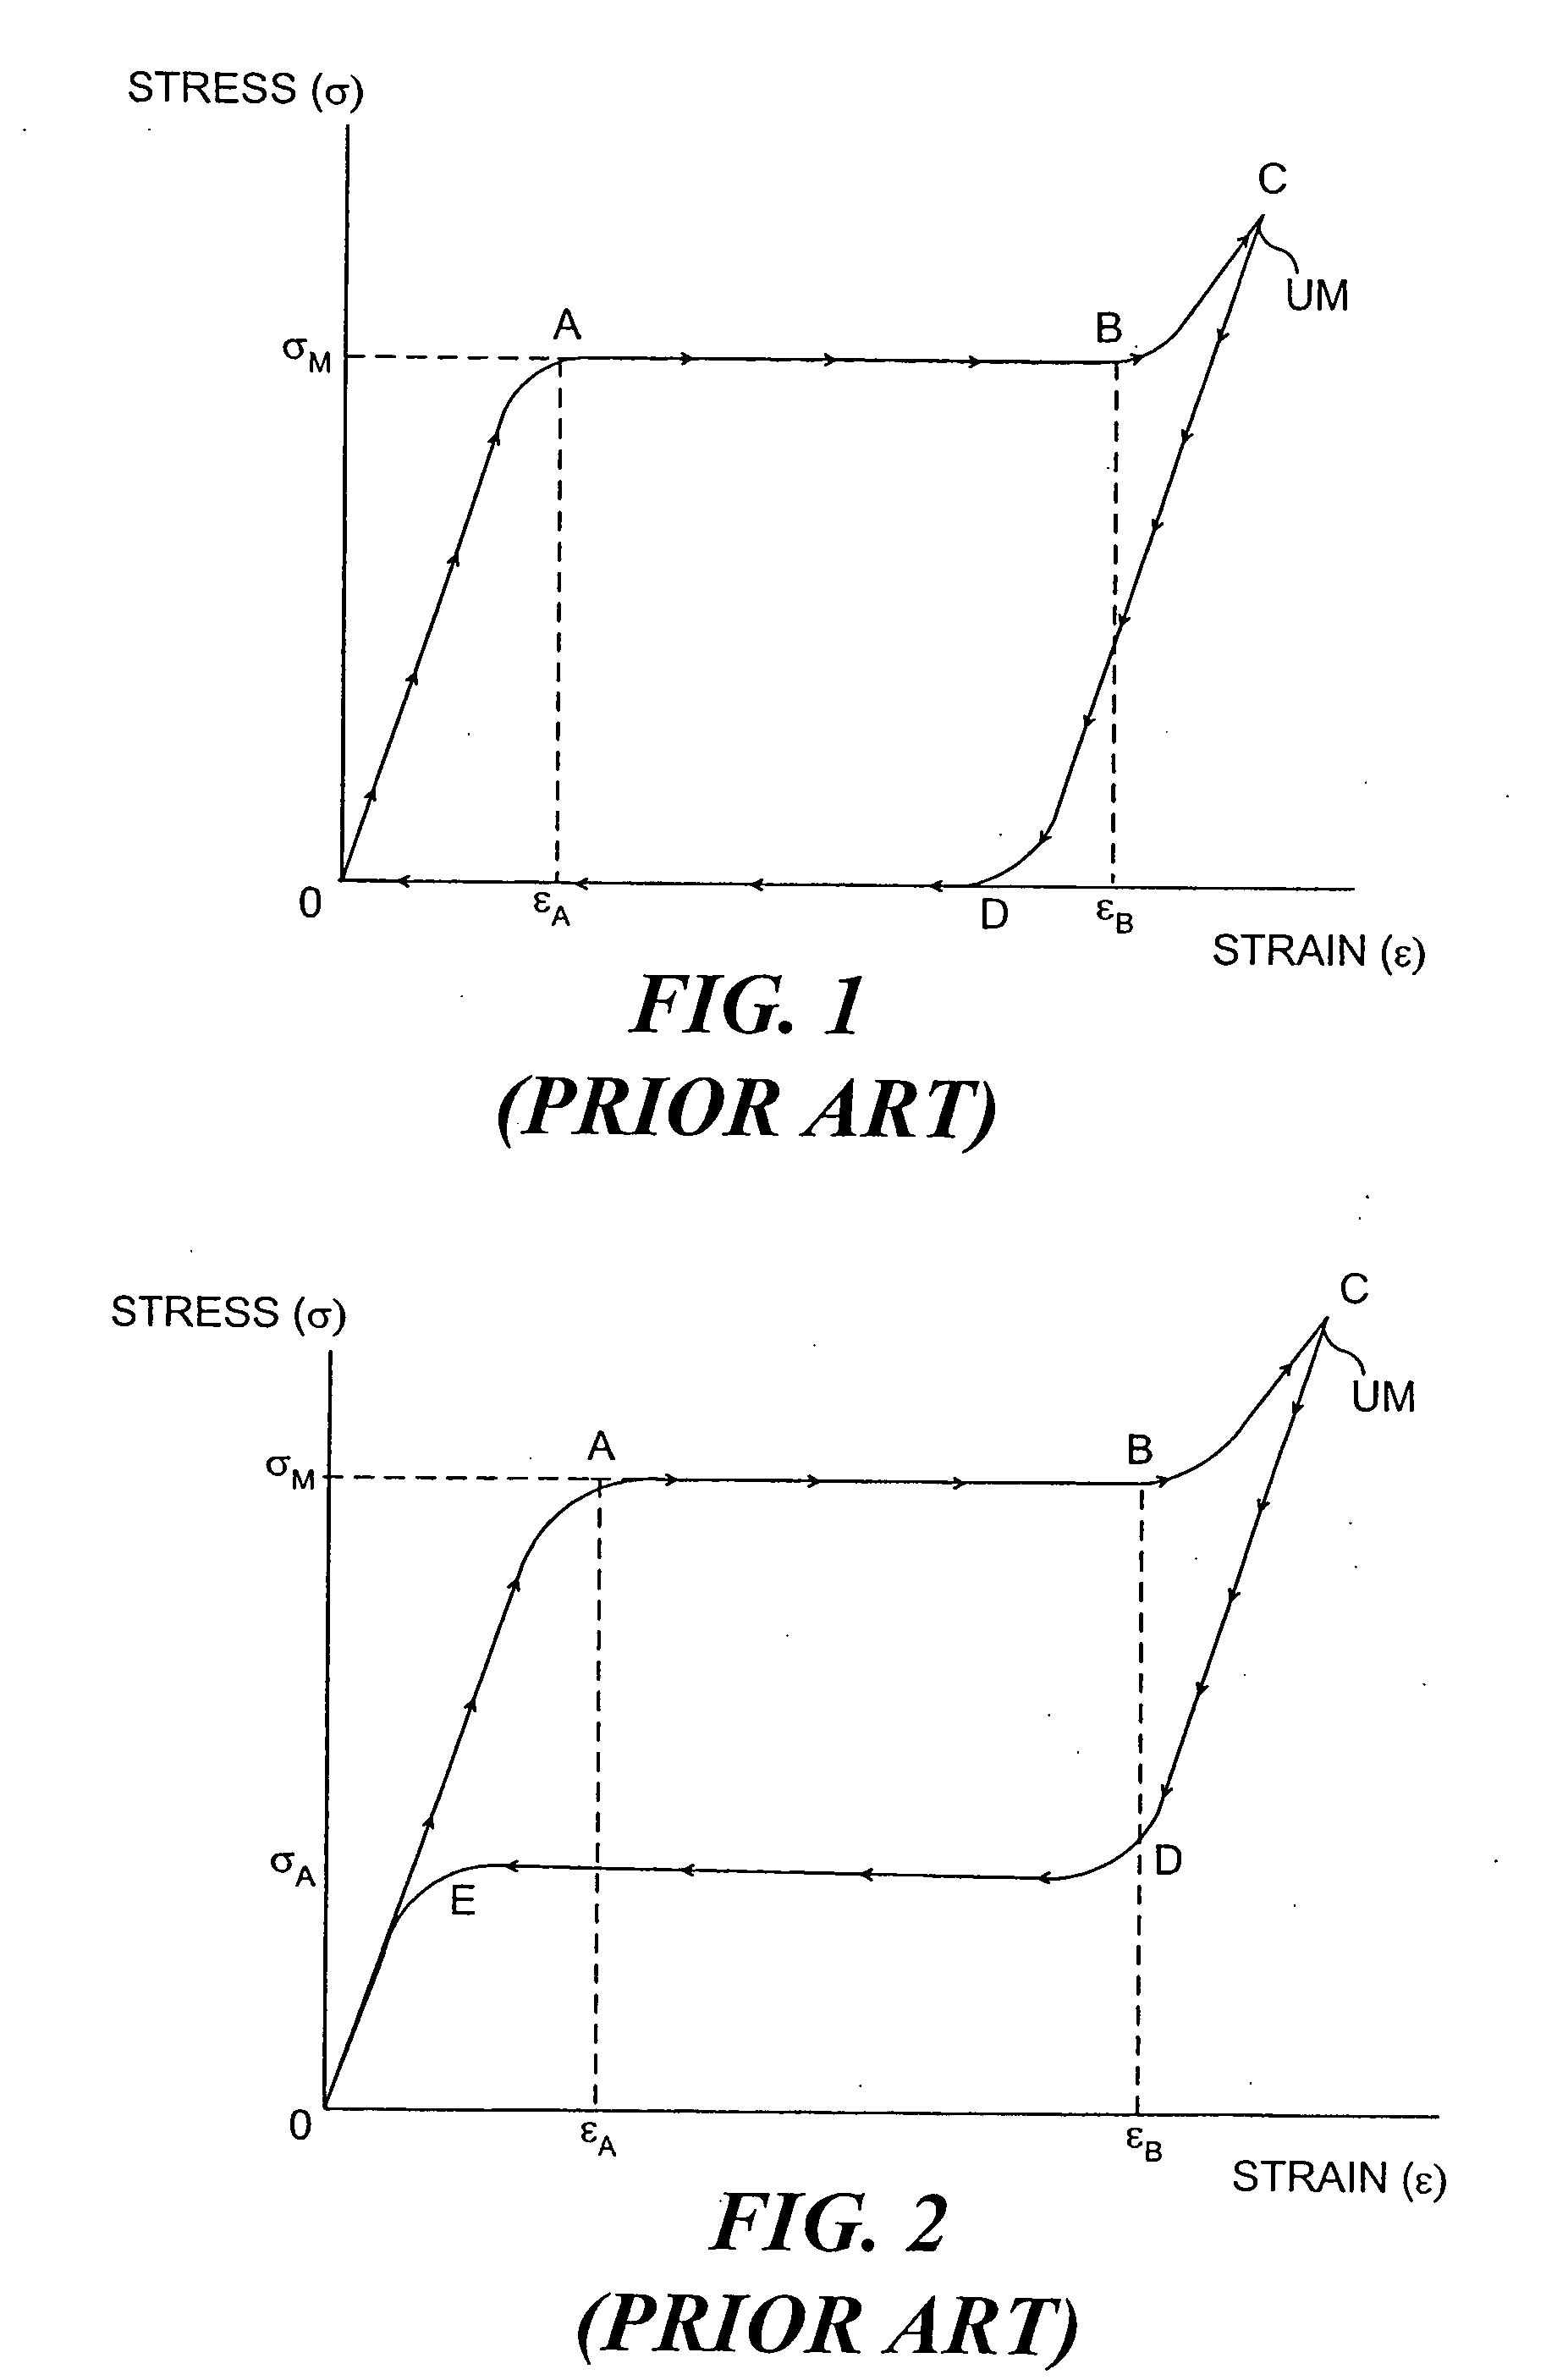 Mitral valve device using conditioned shape memory alloy